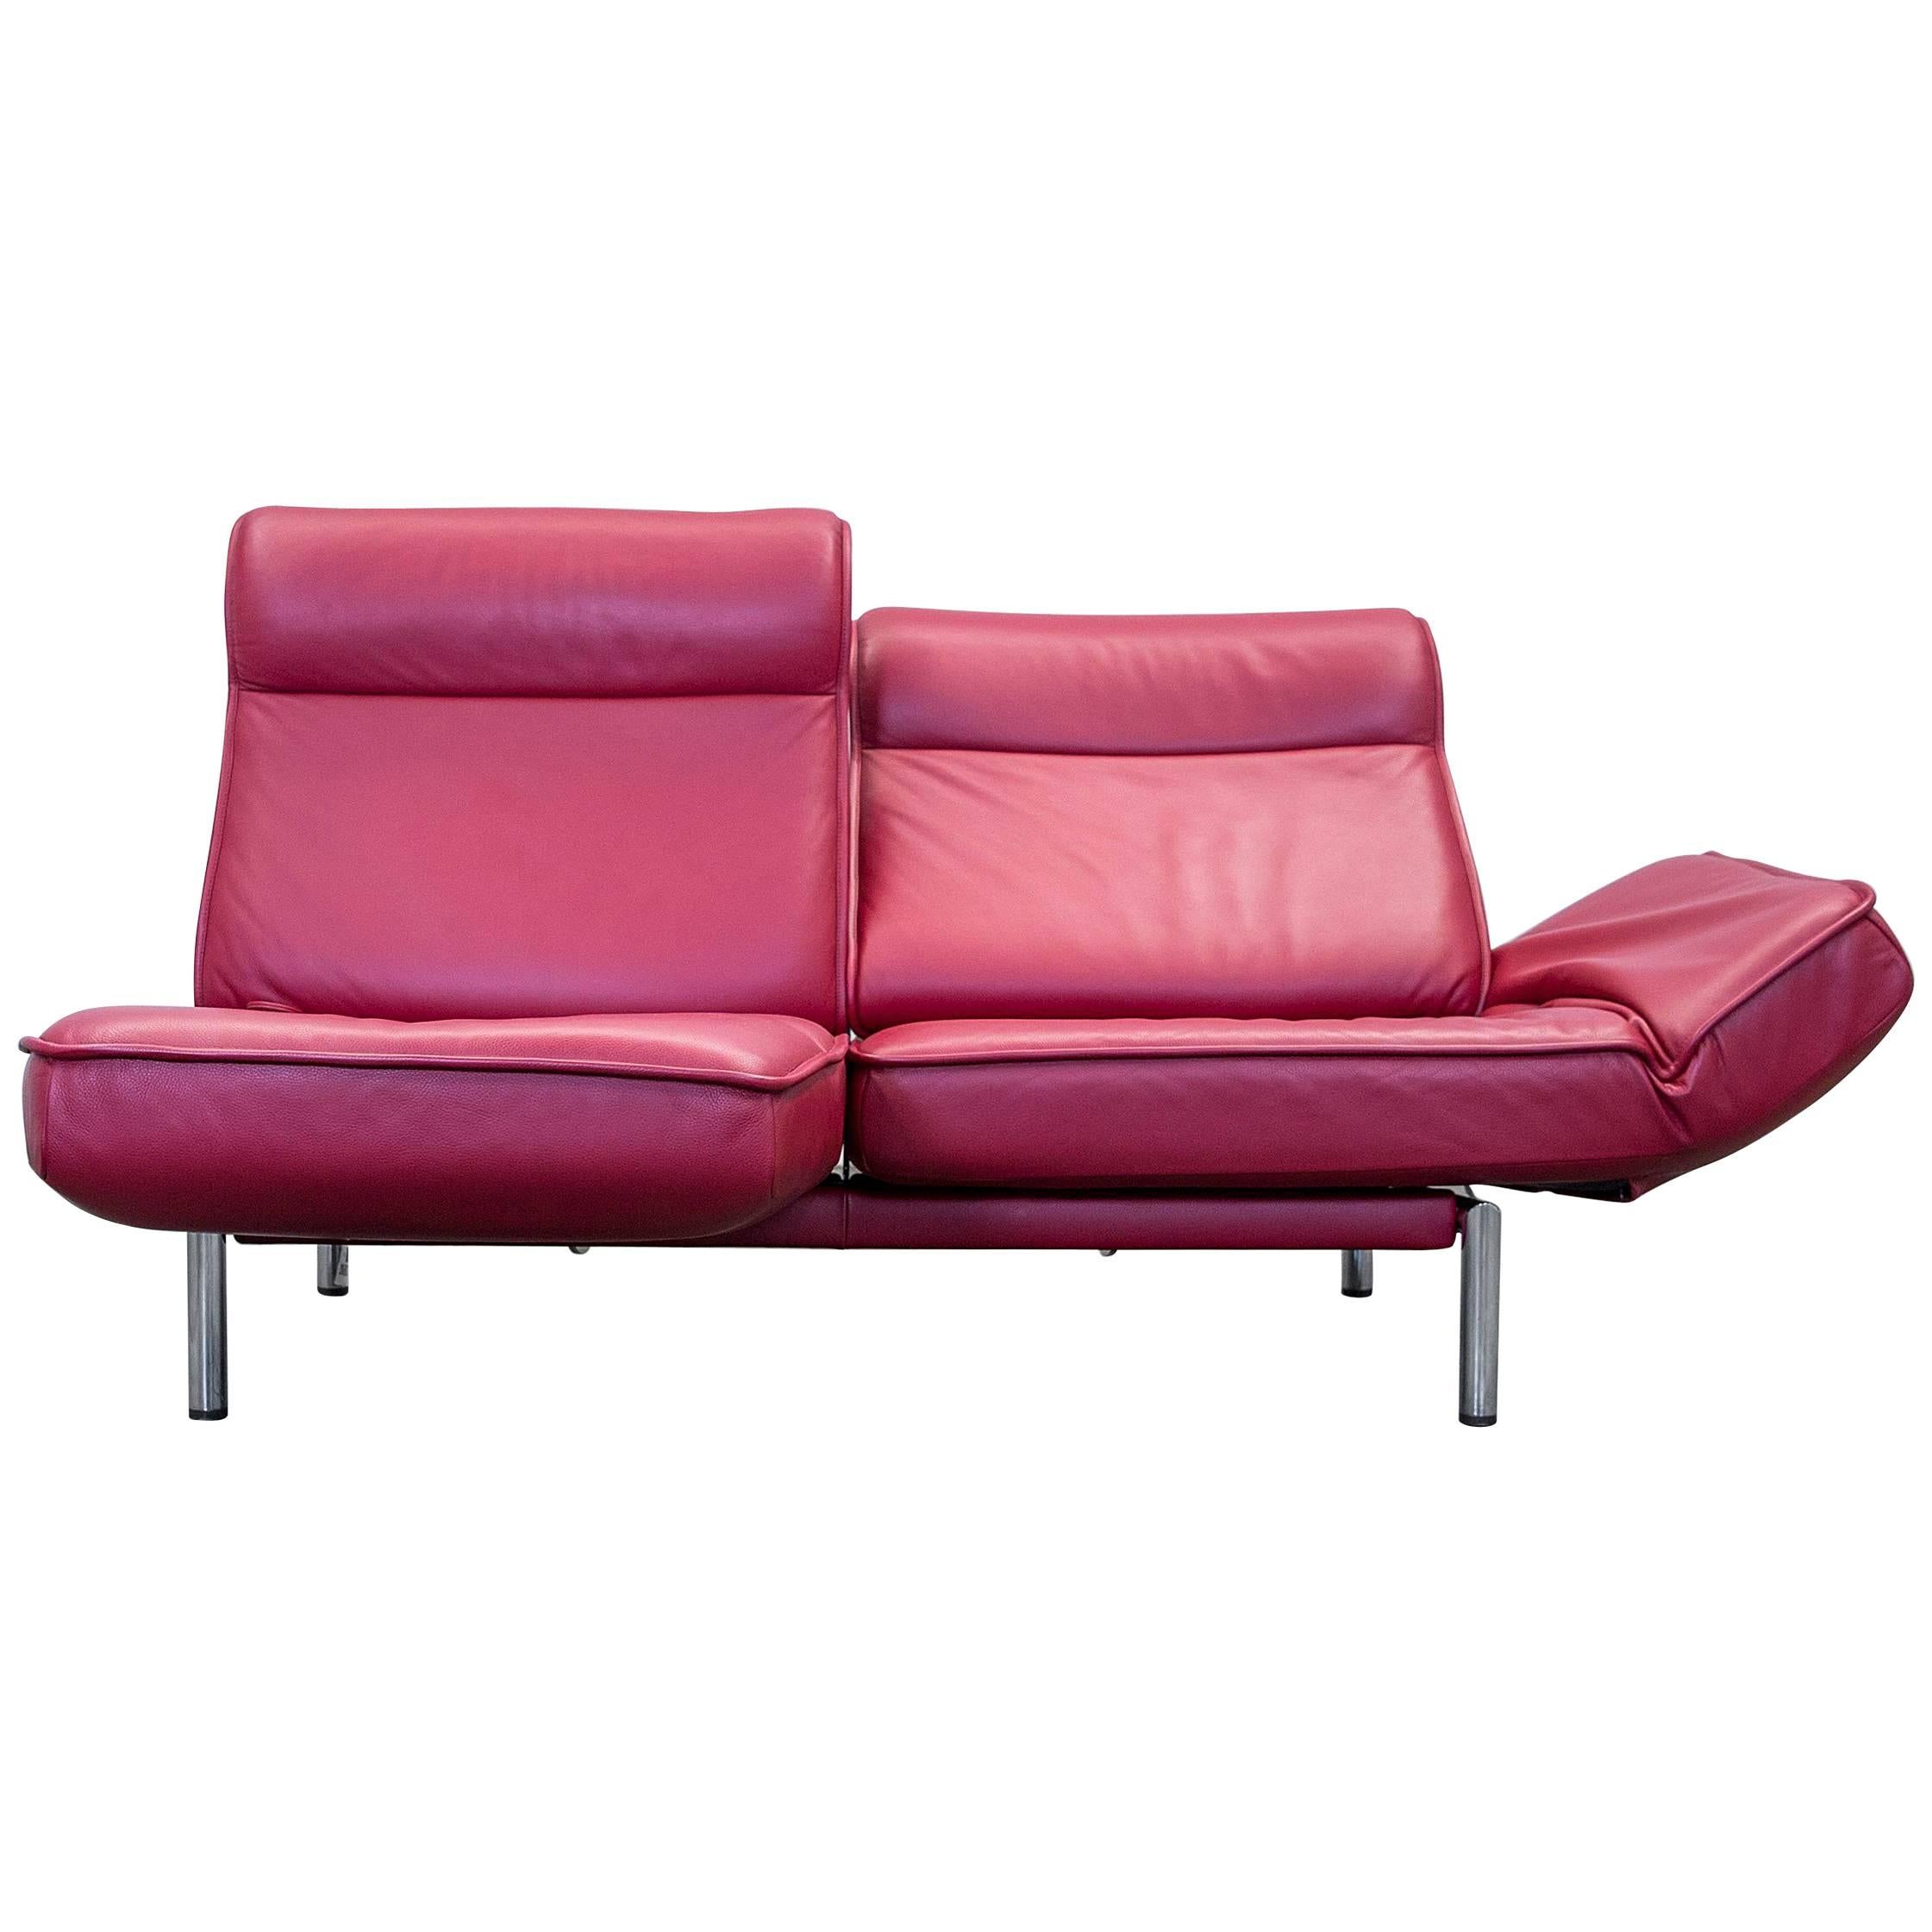 De Sede Ds 450 Designer Leather Sofa Red Relax Function Two-Seat Modern